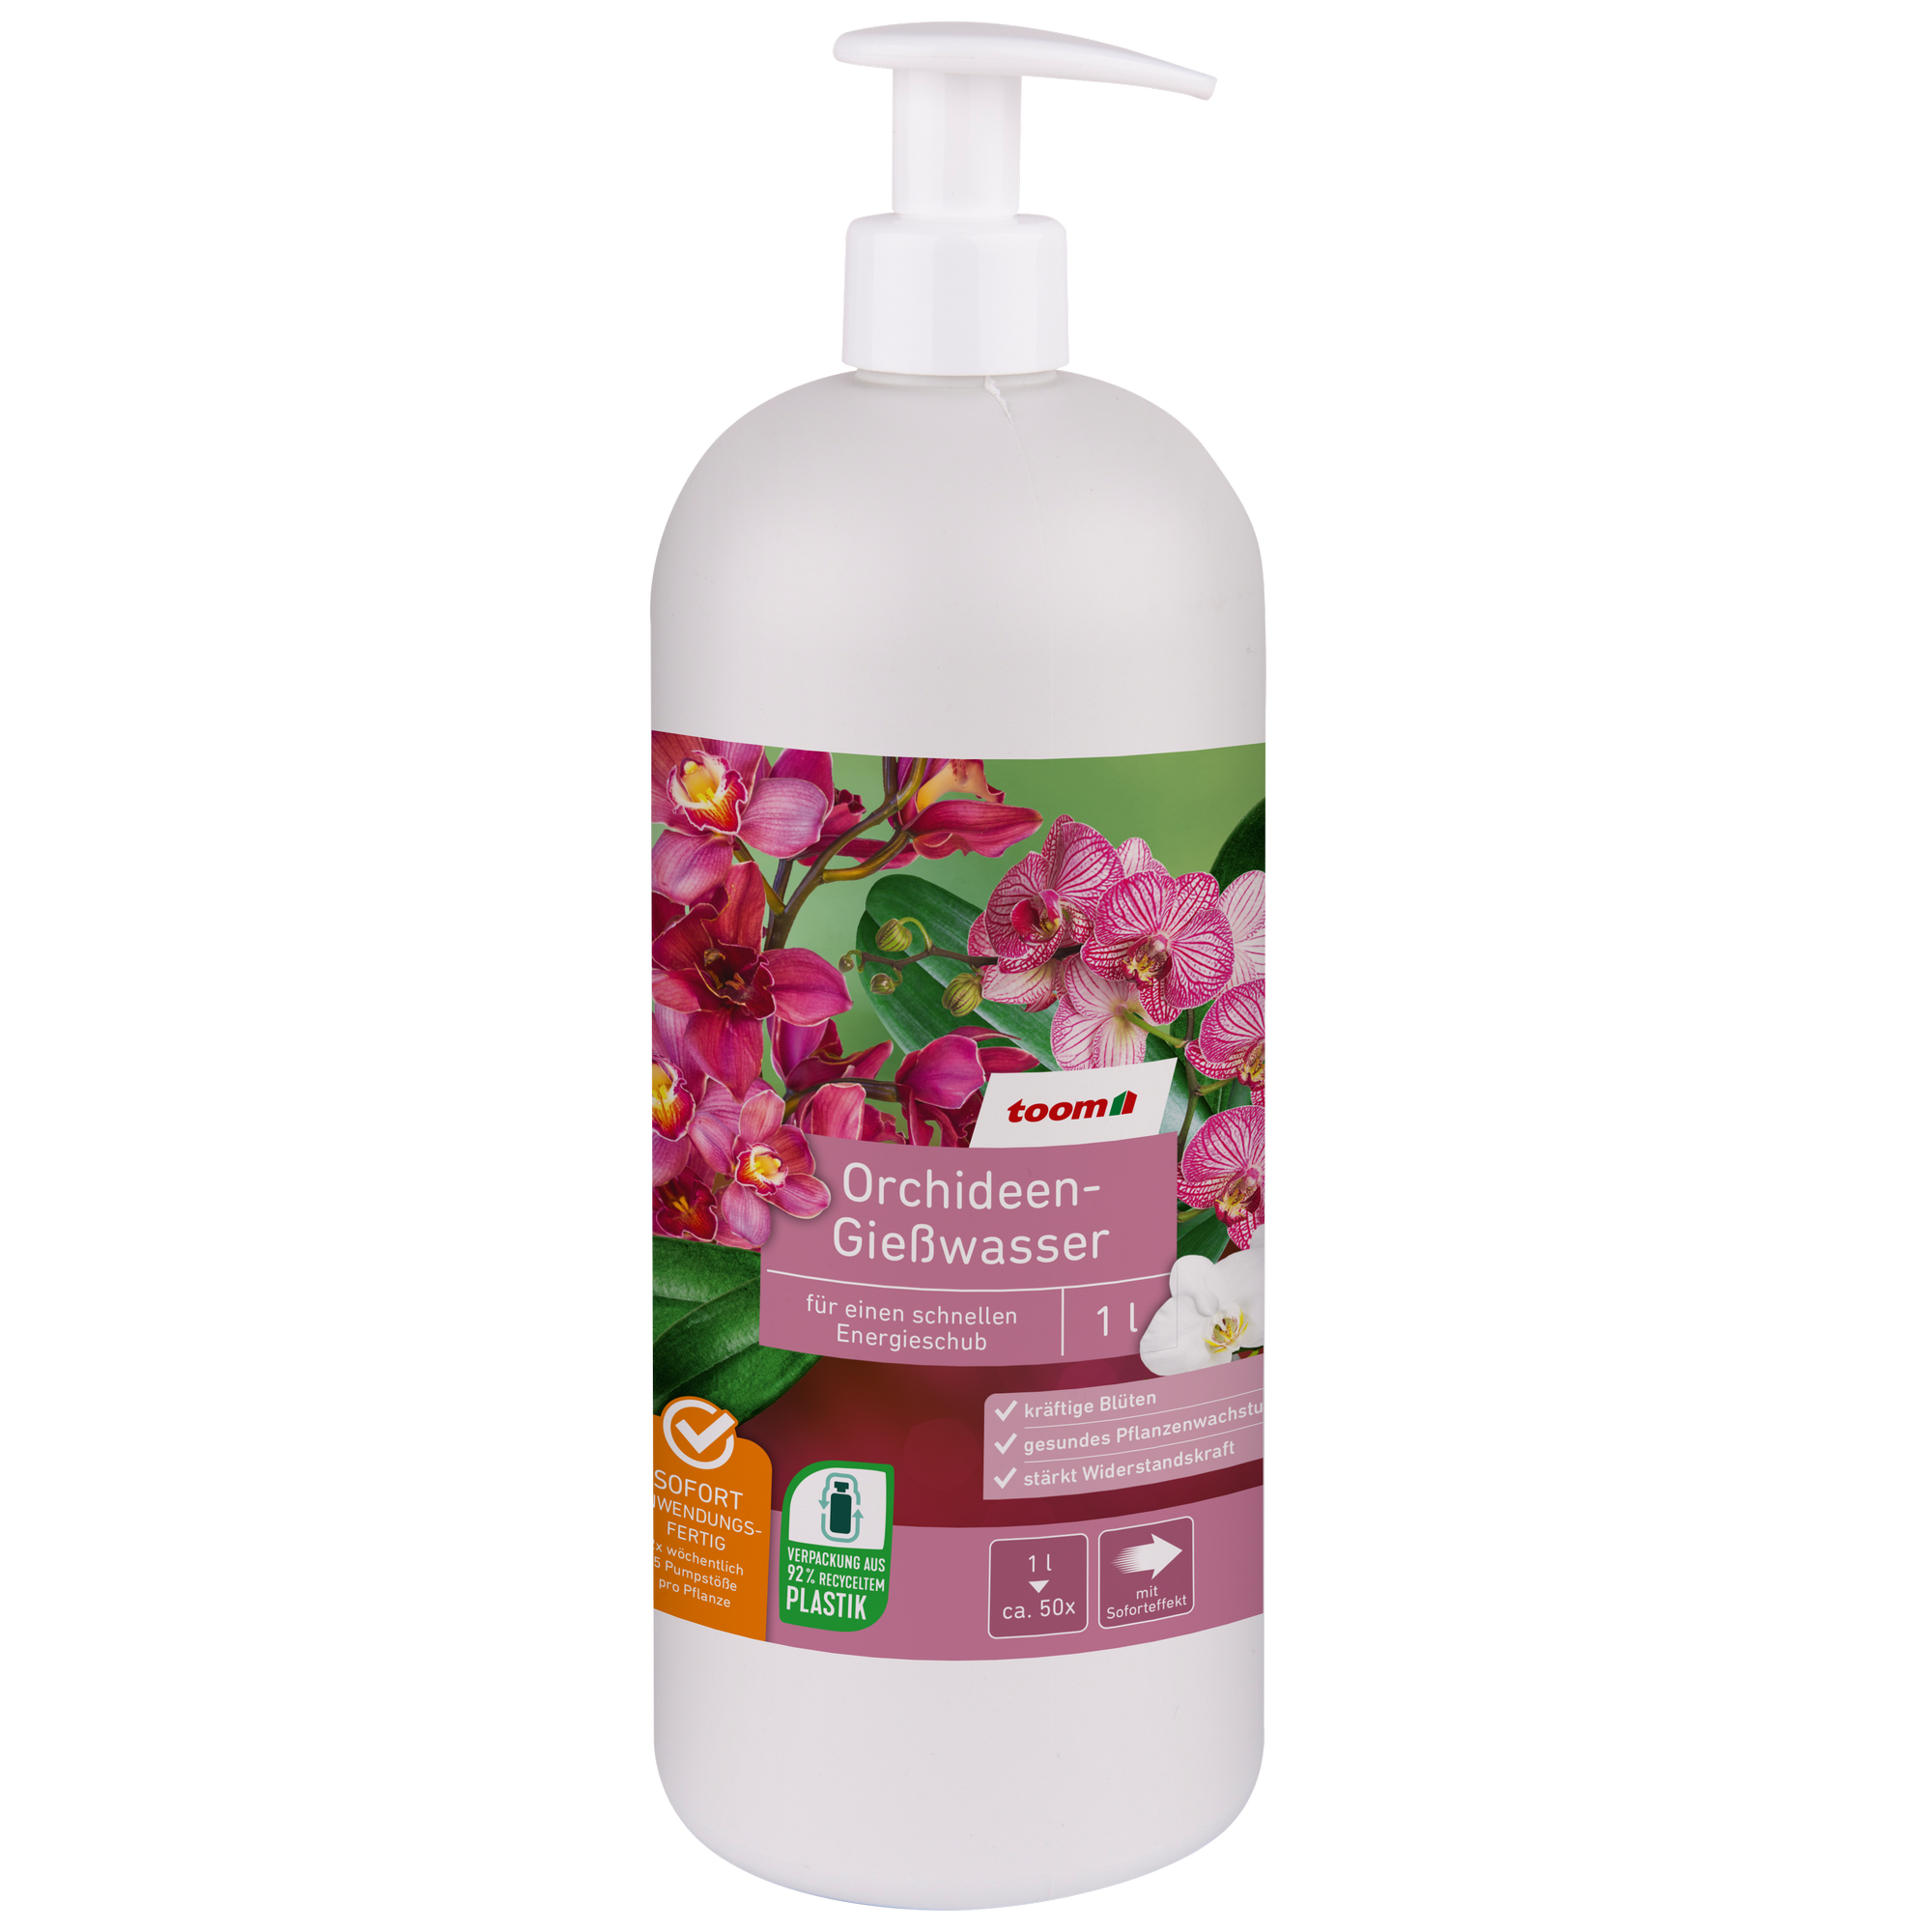 Orchideen-Gießwasser 1 l + product picture